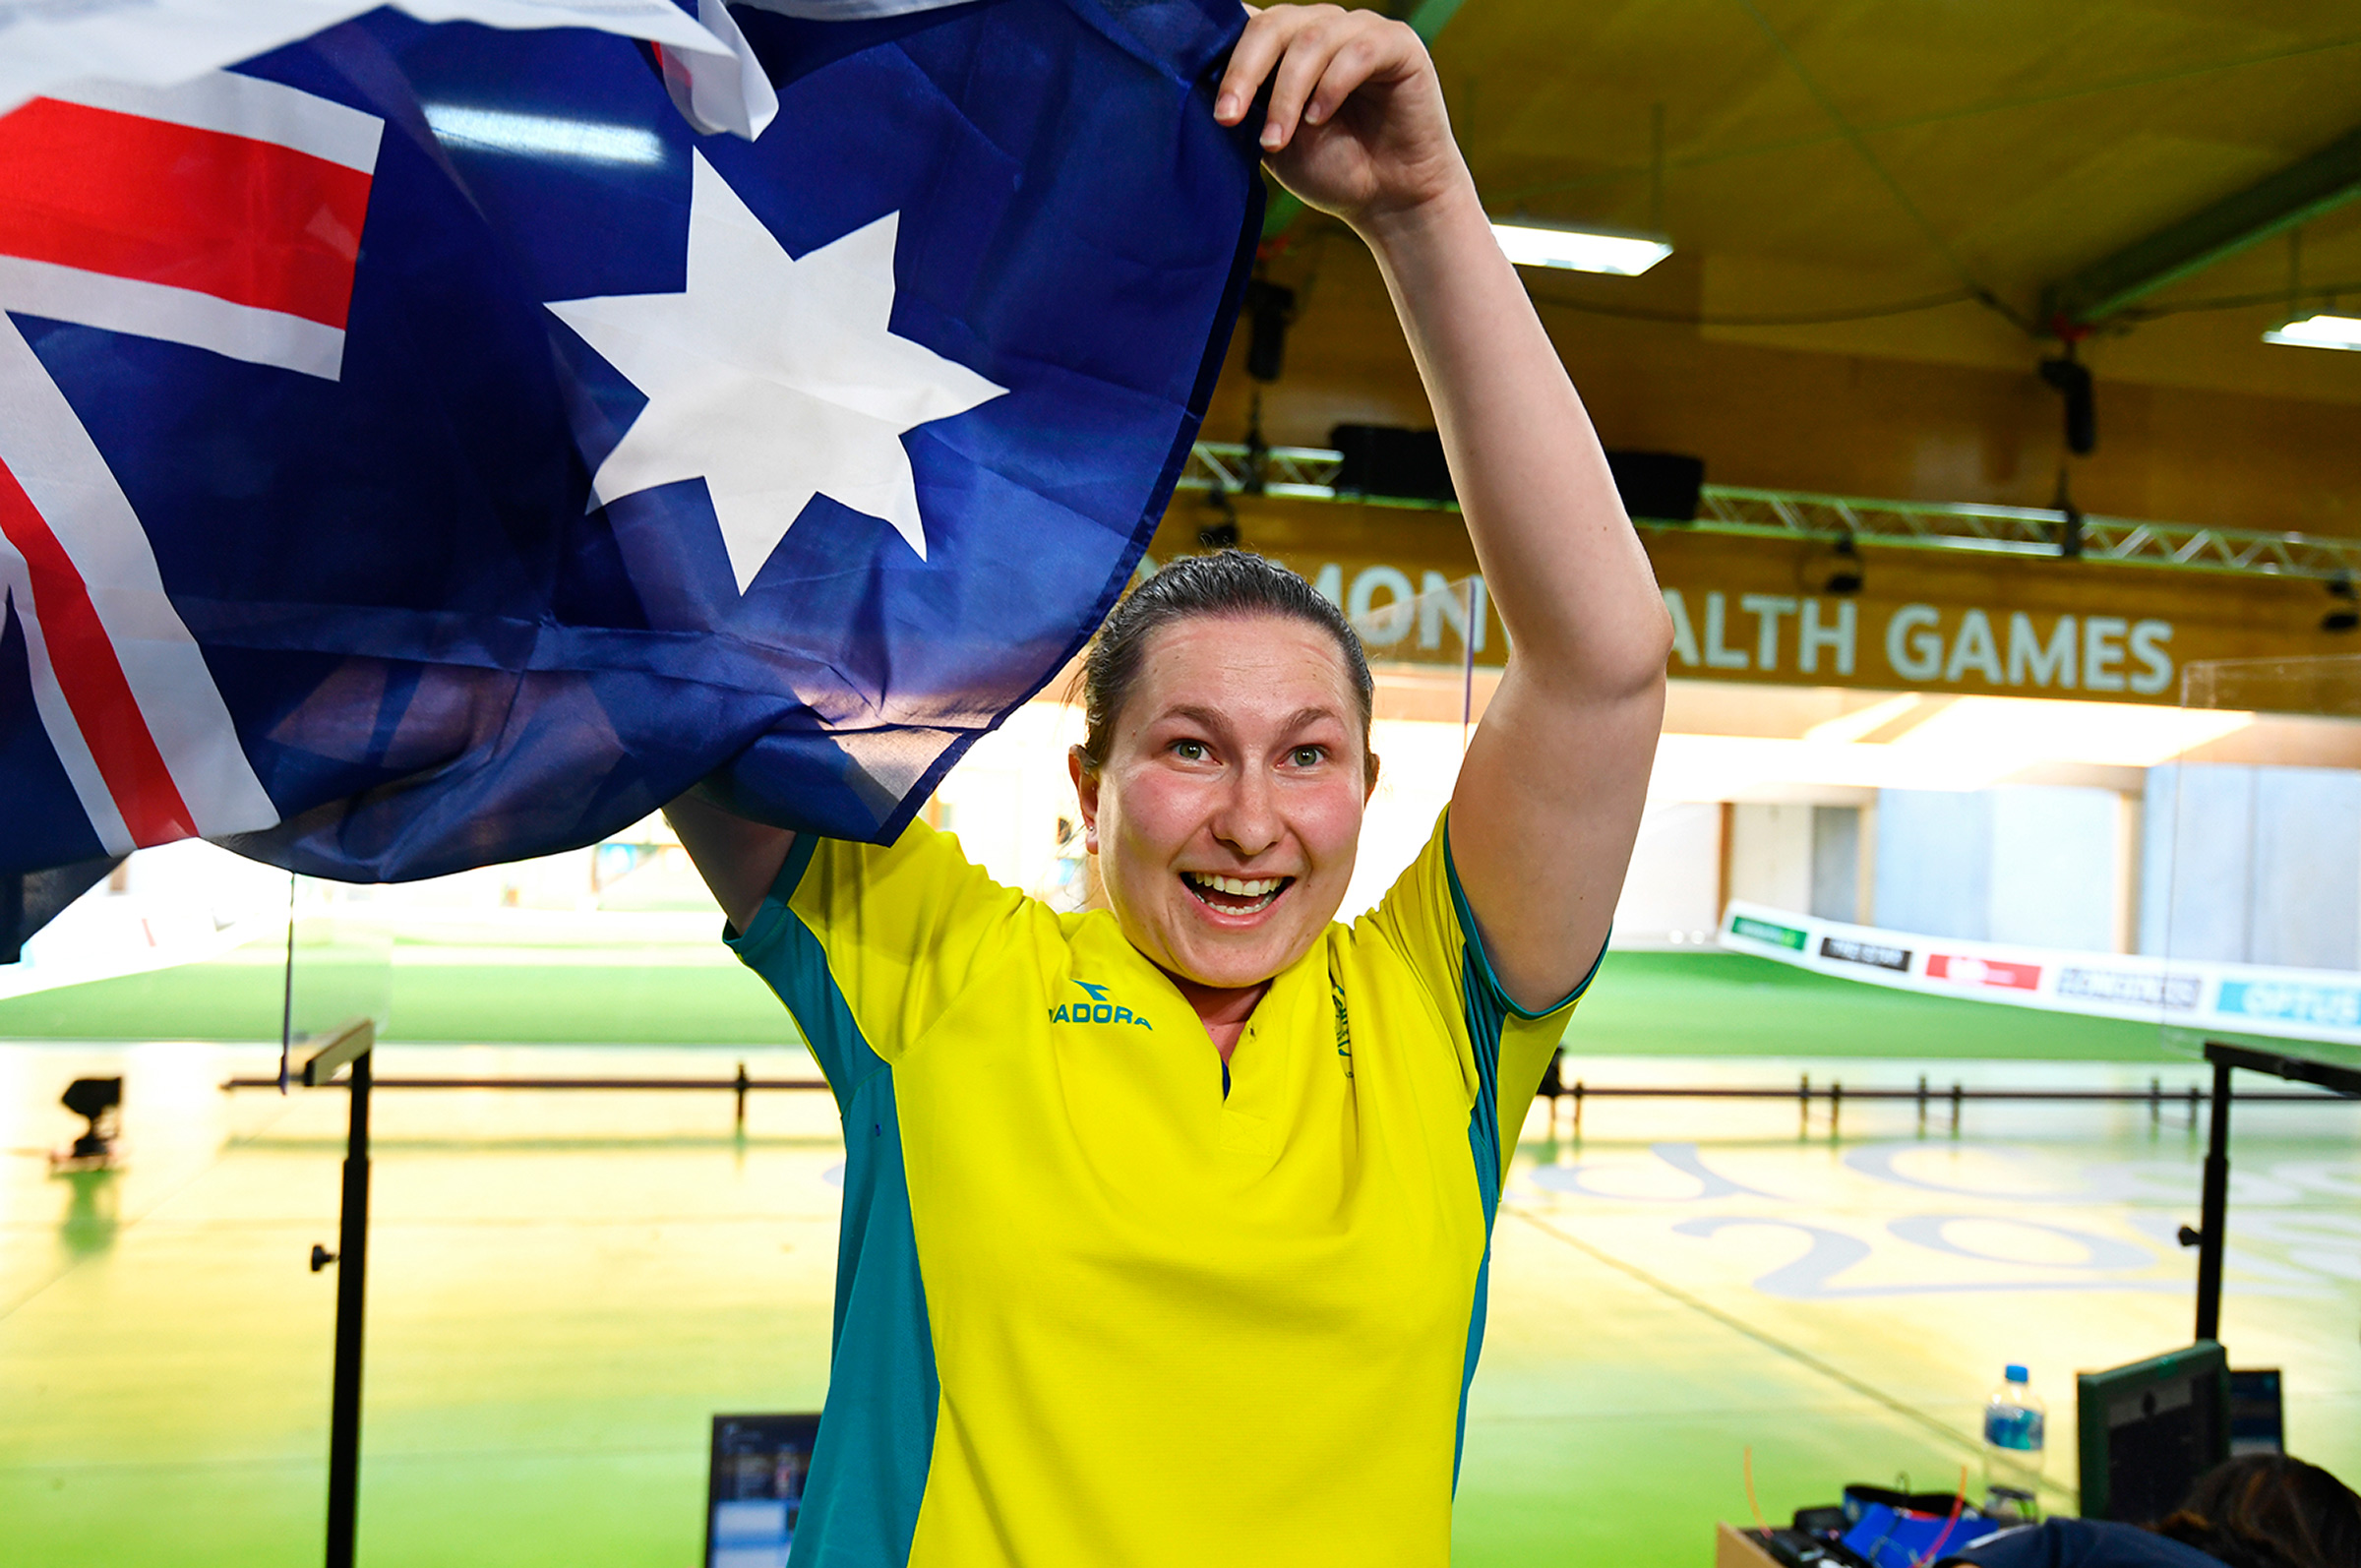 Galiabovitch after winning silver at the 2018 Commonwealth Games (Dan Peled—EPA-EFE/Shutterstock)